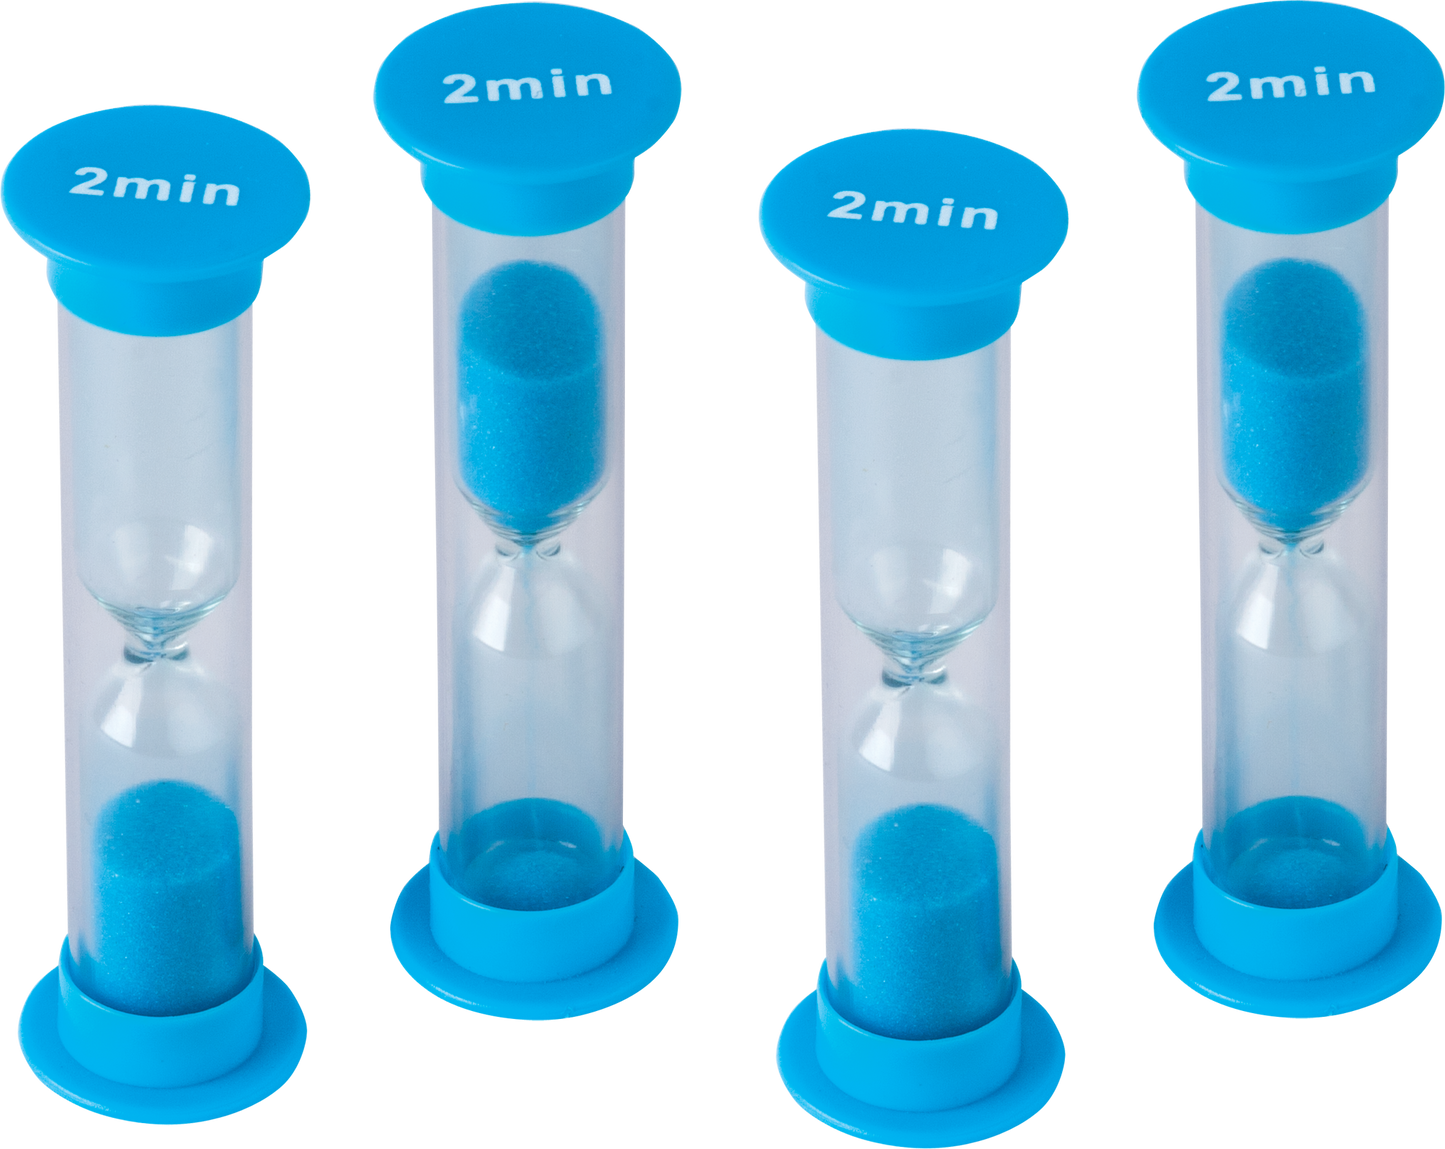 2 Minute Sand Timers - Small